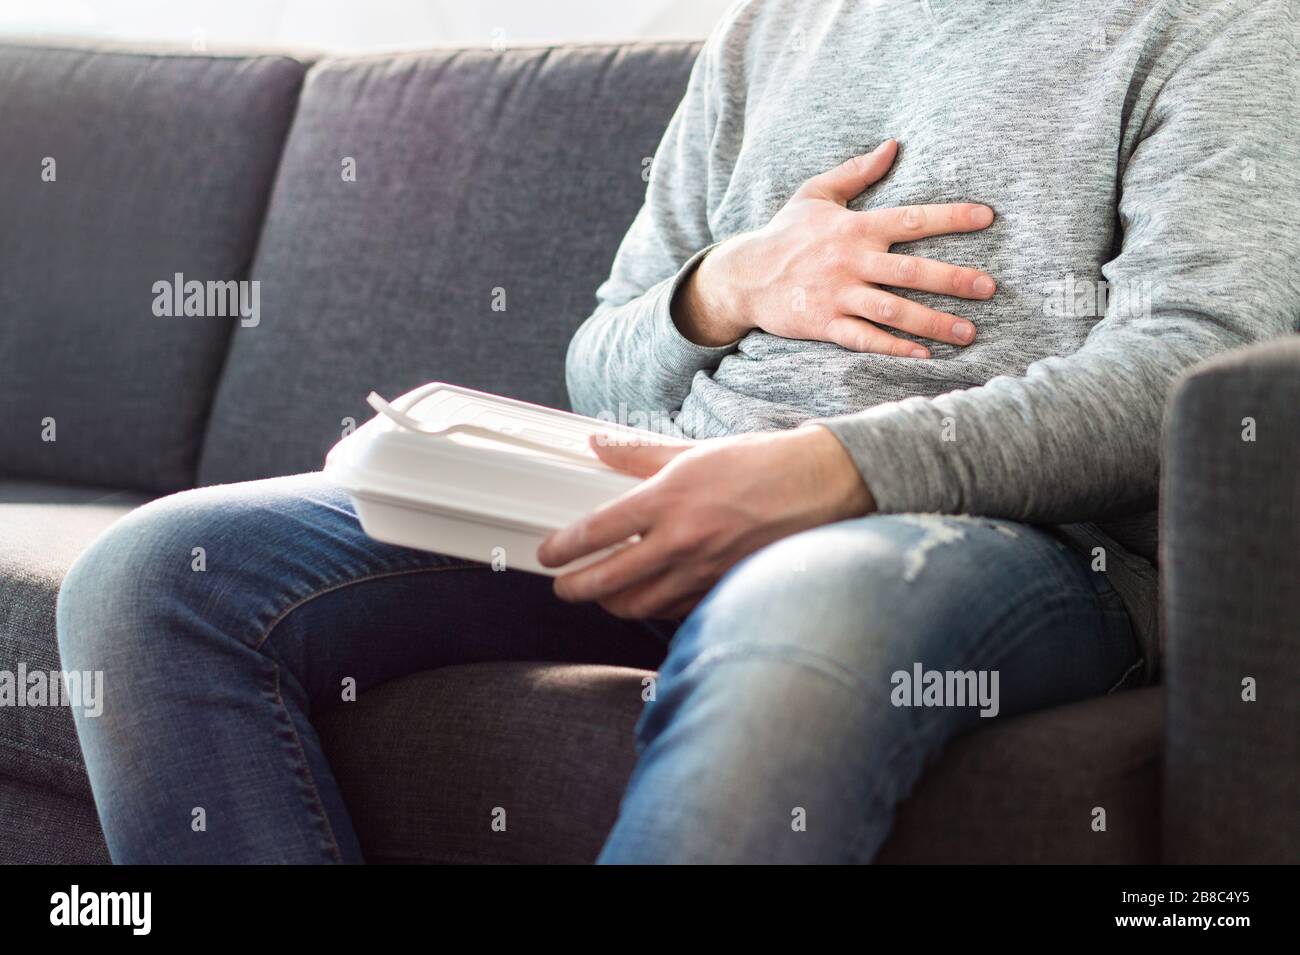 Stomach pain, food poisoning or digestion problem after fast junk food. Man ate too much and is holding belly with hand. Indigestion, heart burn. Stock Photo